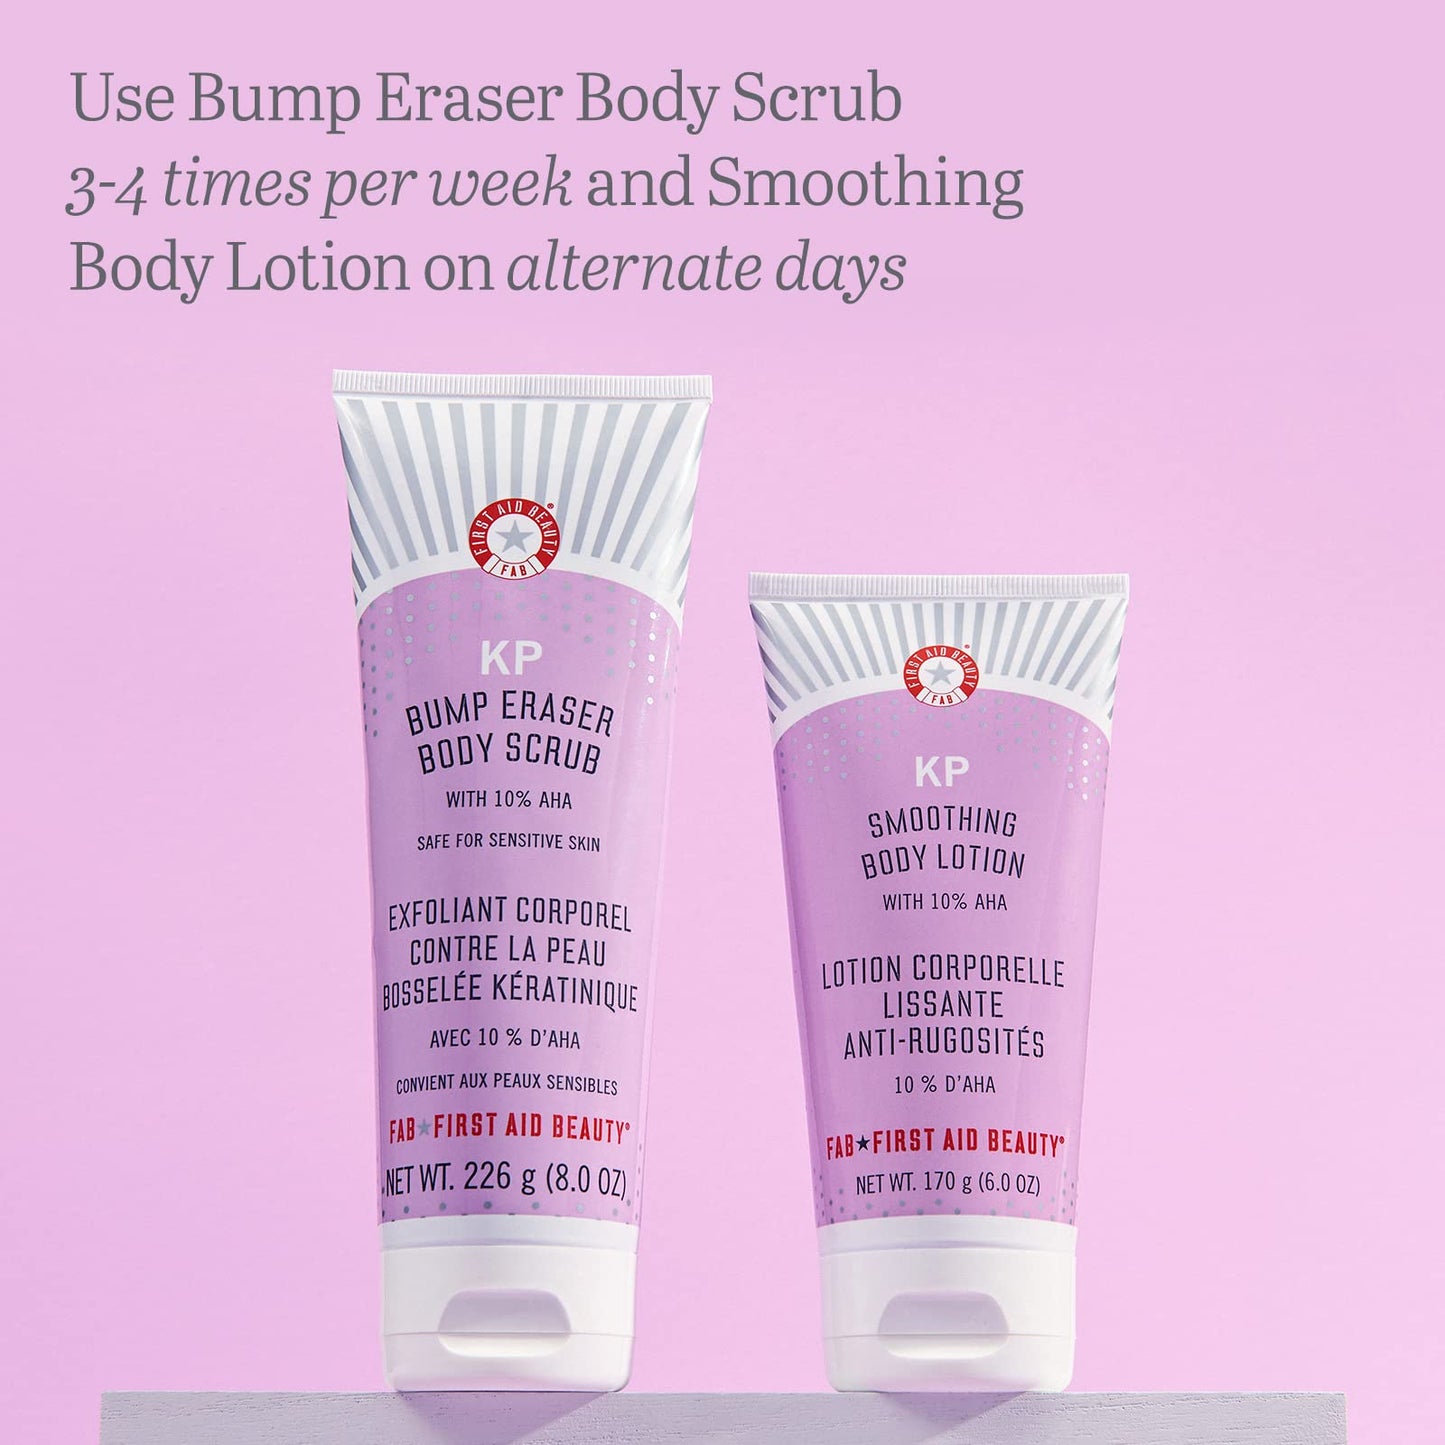 First Aid Beauty KP Bundle: KP Bump Eraser Body Scrub with 10% AHA – 8 oz – and KP Smoothing Body Lotion – 6 oz